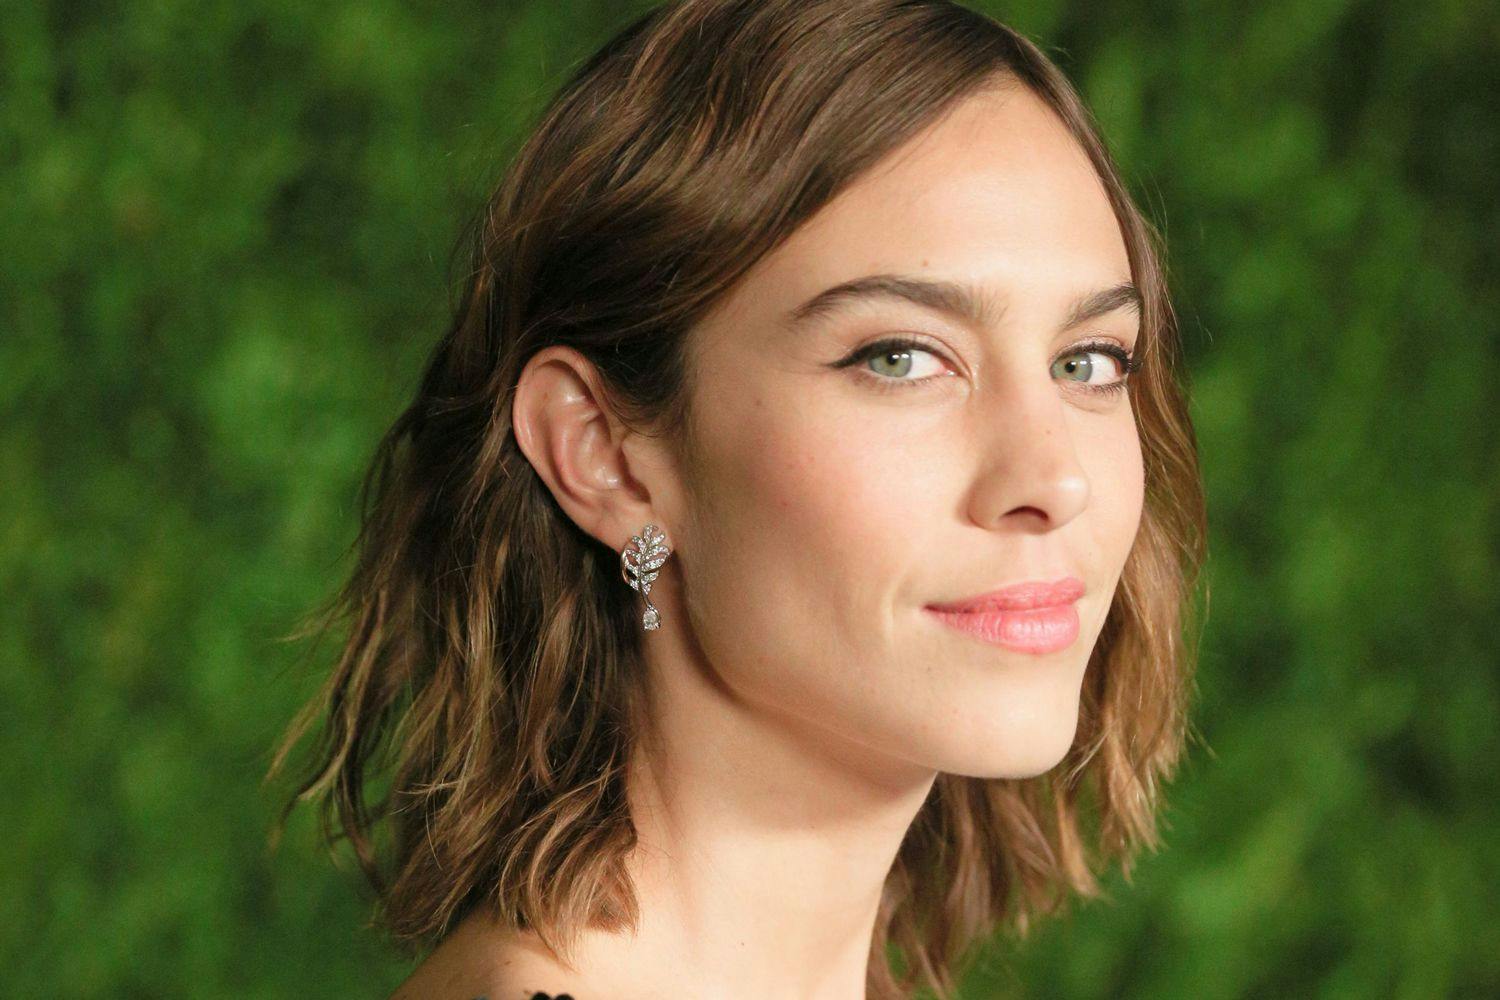 Alexa Chung talks us through her hair history which style does she